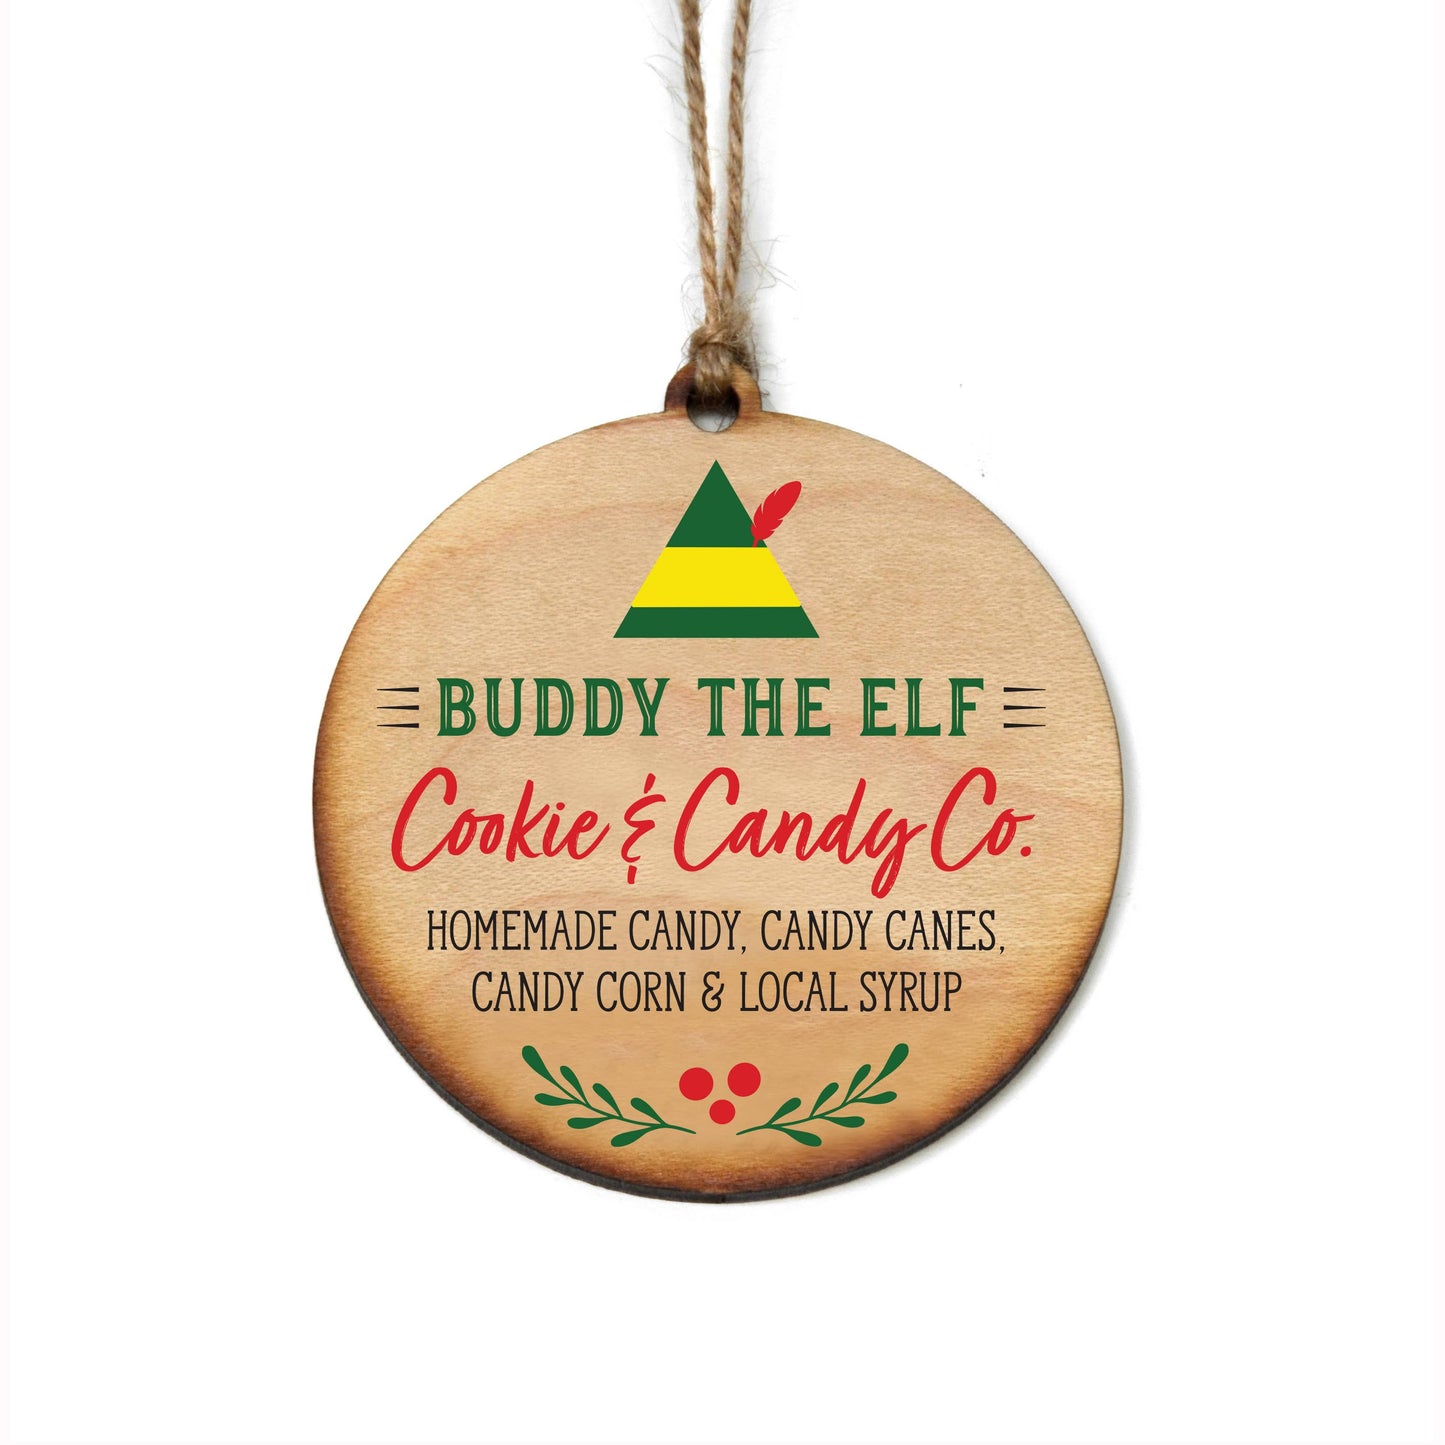 Buddy the Elf Cookie & Candy Co. Christmas Ornaments